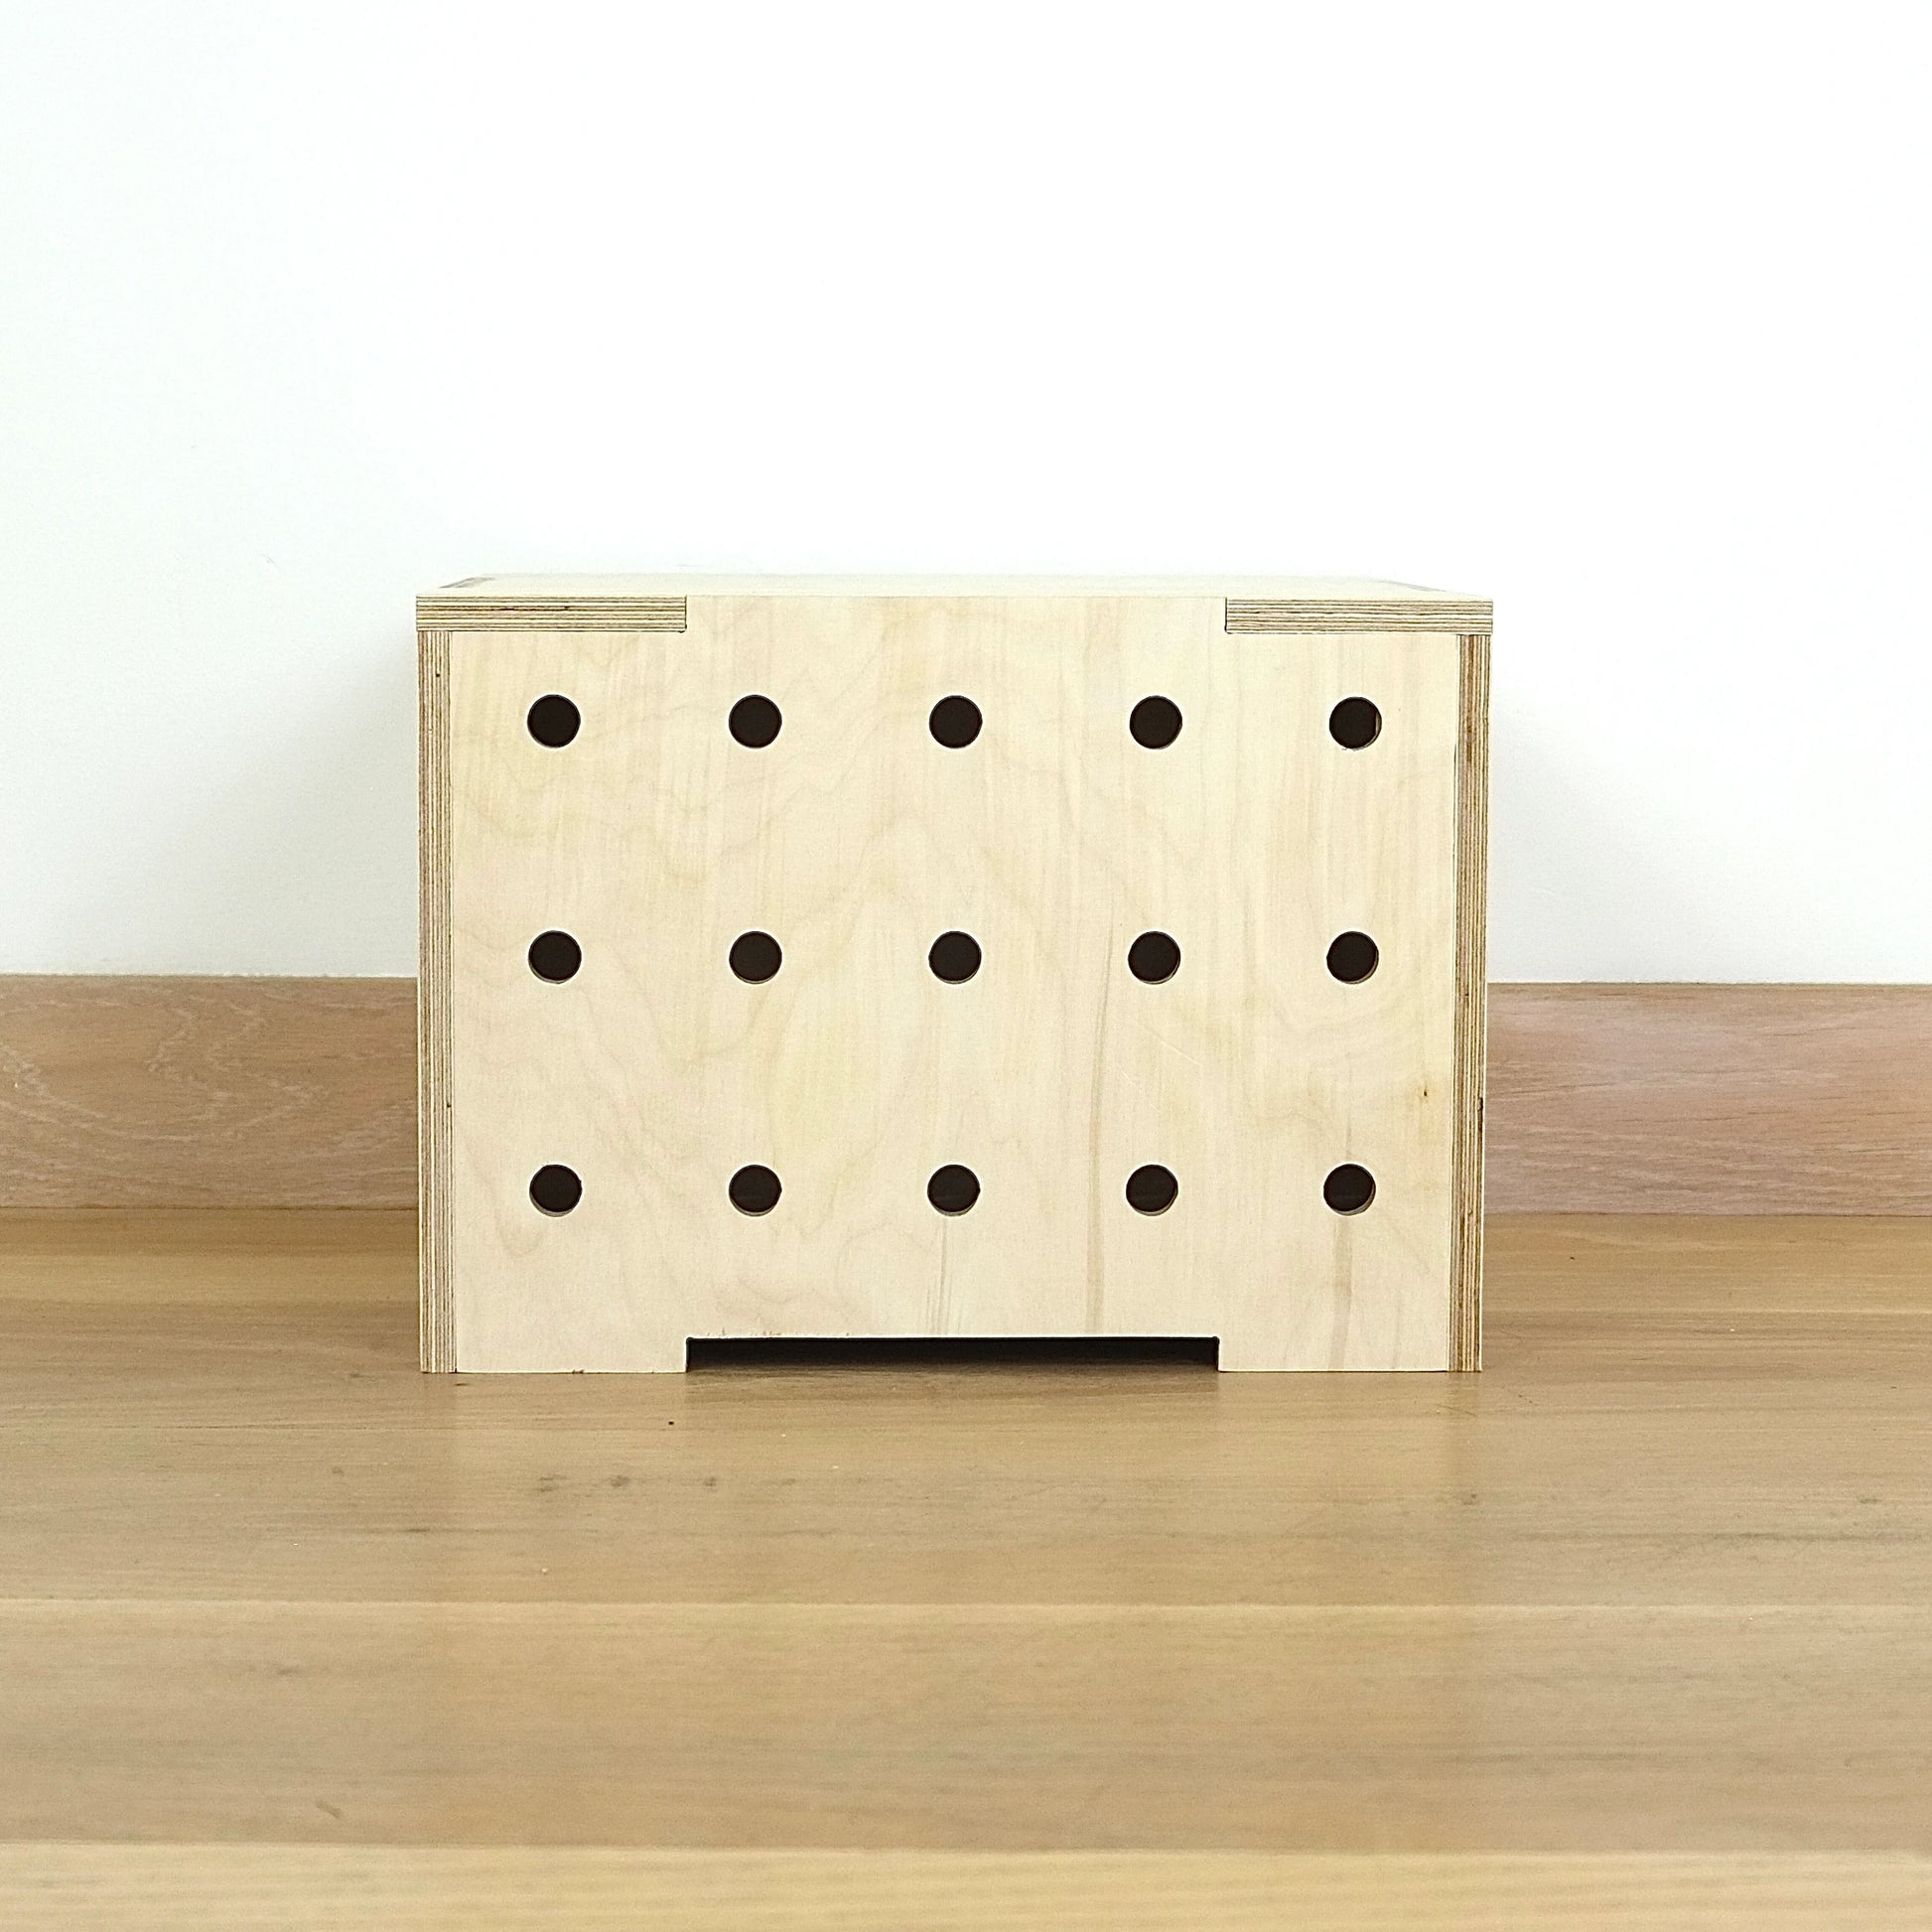 A simple pale wooden square shaped storage crate facing front on, with three rows of holes cut in the front facet and a wooden lid, sitting on a wooden floor.